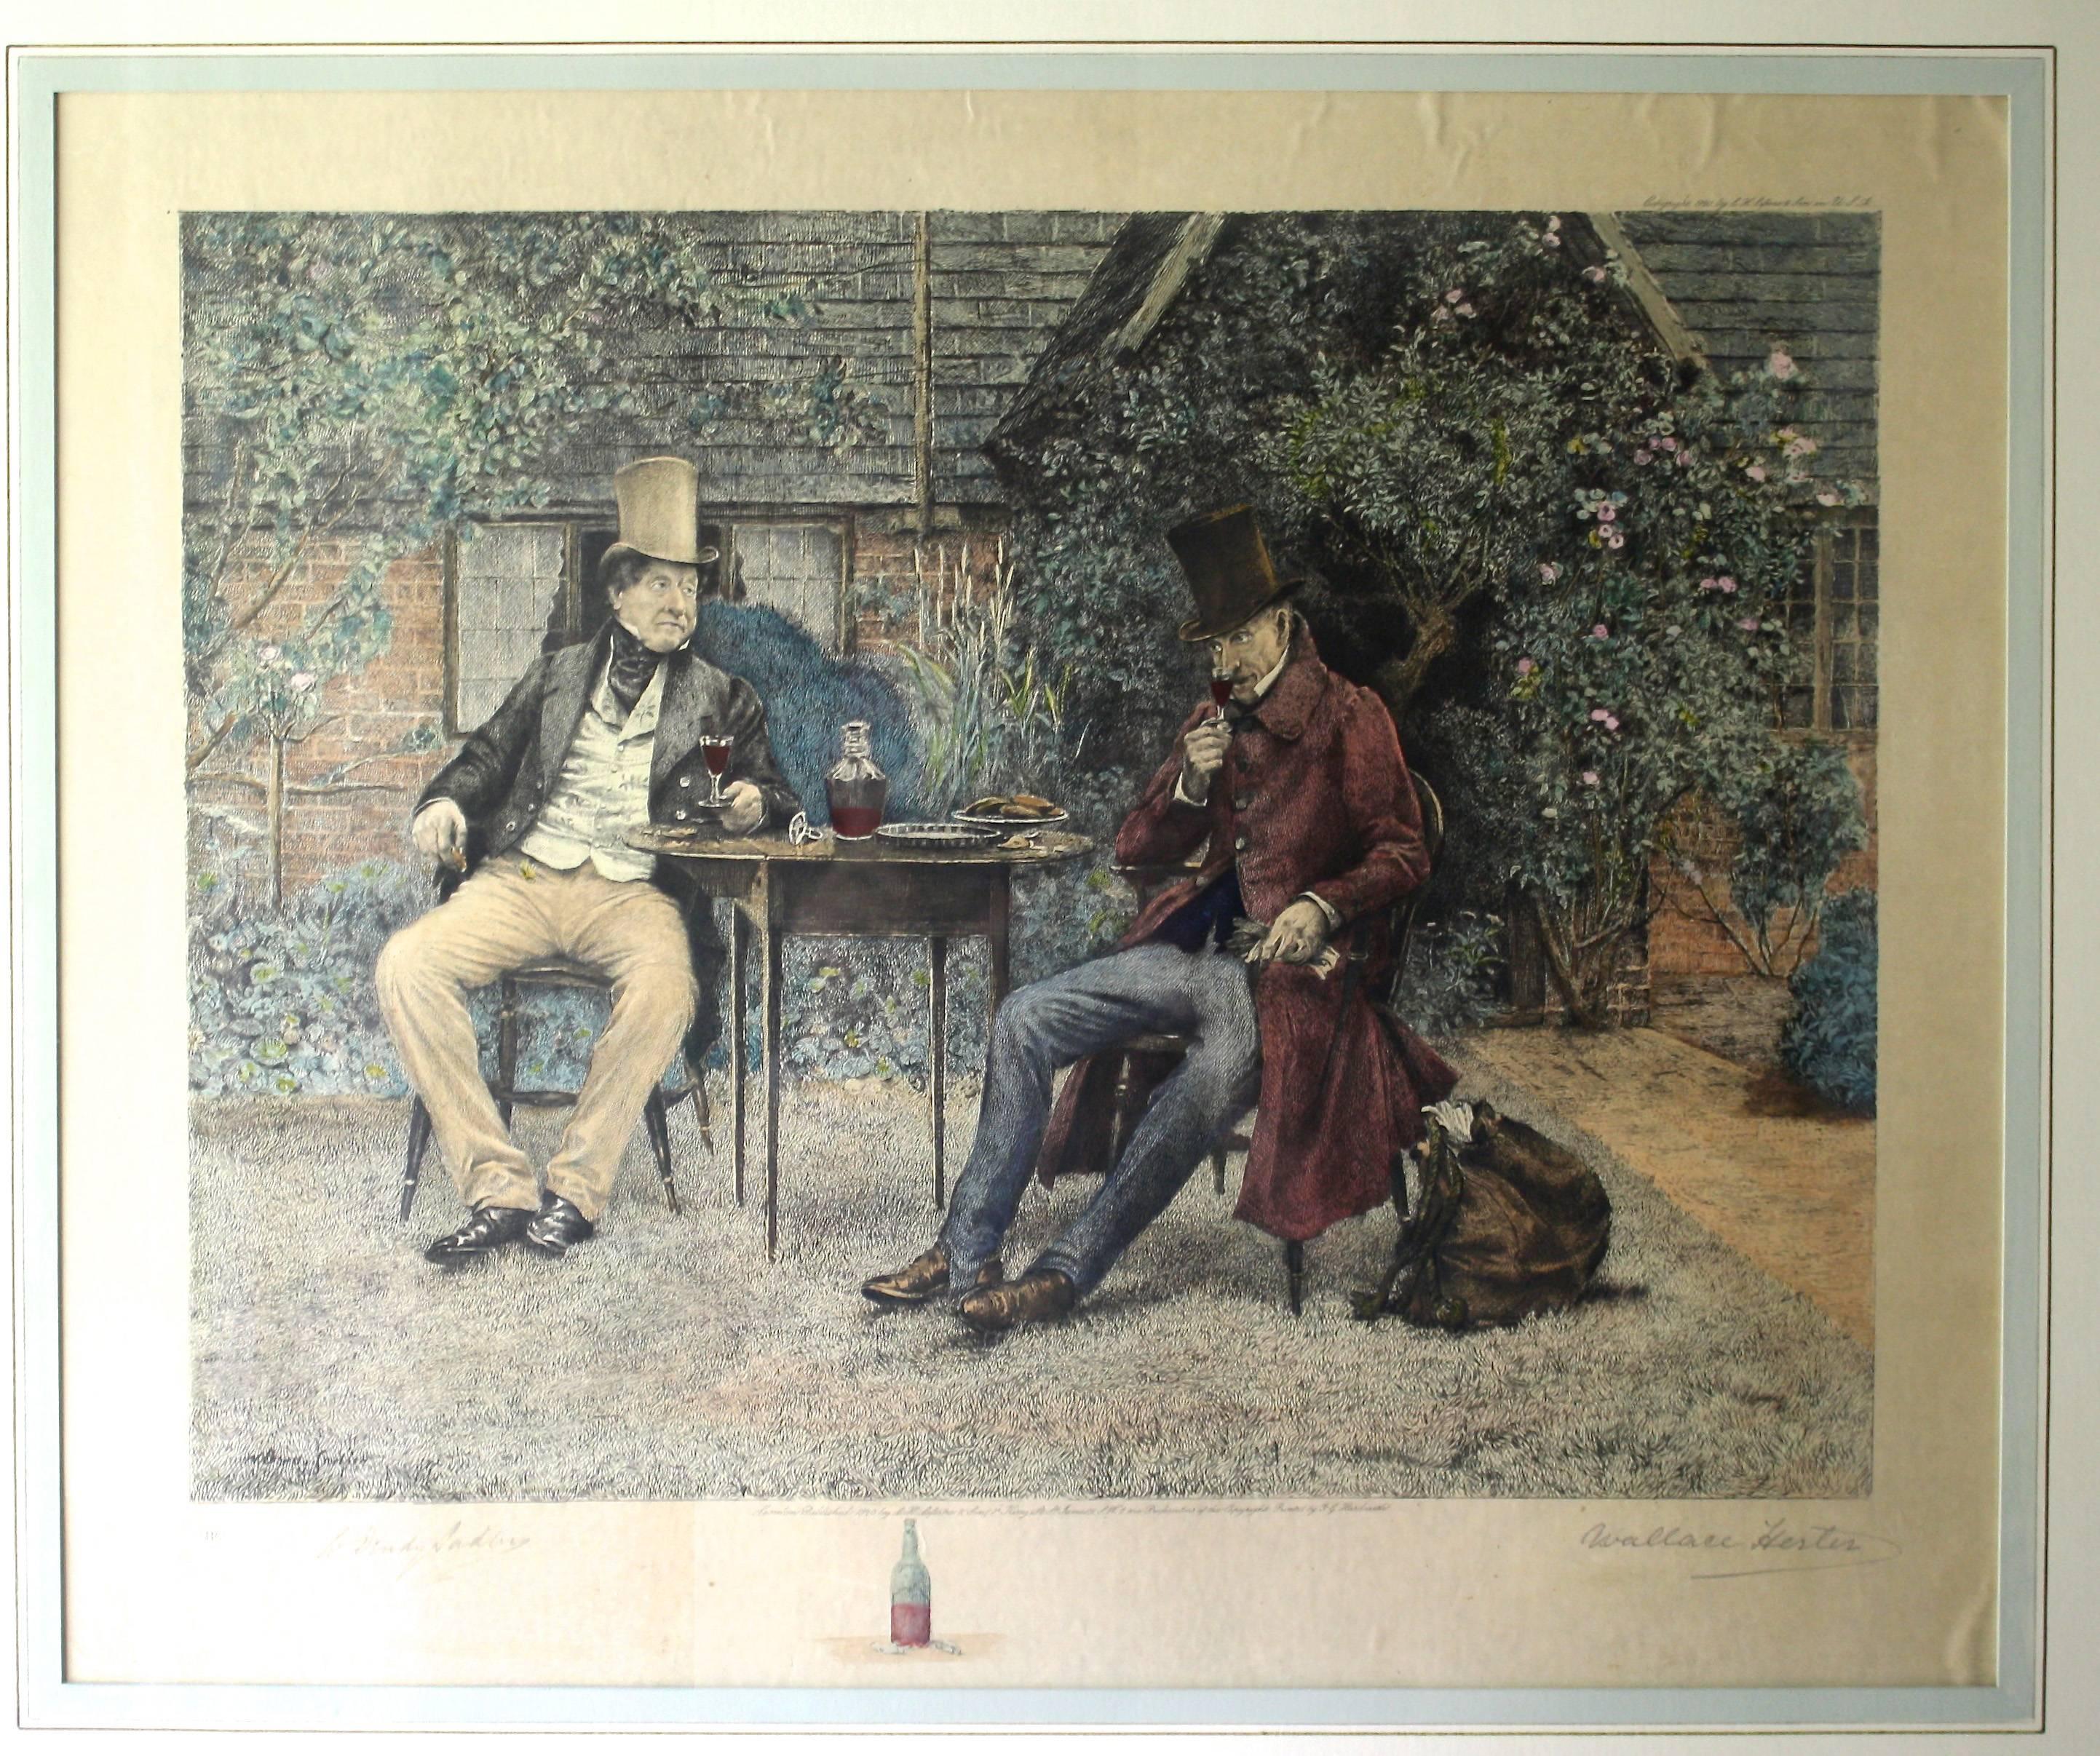 After an Edwardian period W. Dendy Sadler painting of two gentlemen in a garden, a framed and matted Wallace Hester hand colored etching produced by L. H. LeFevre & Son, of King St. London, in 1920.  Signed by both Sadler and Hester.  Ex: a